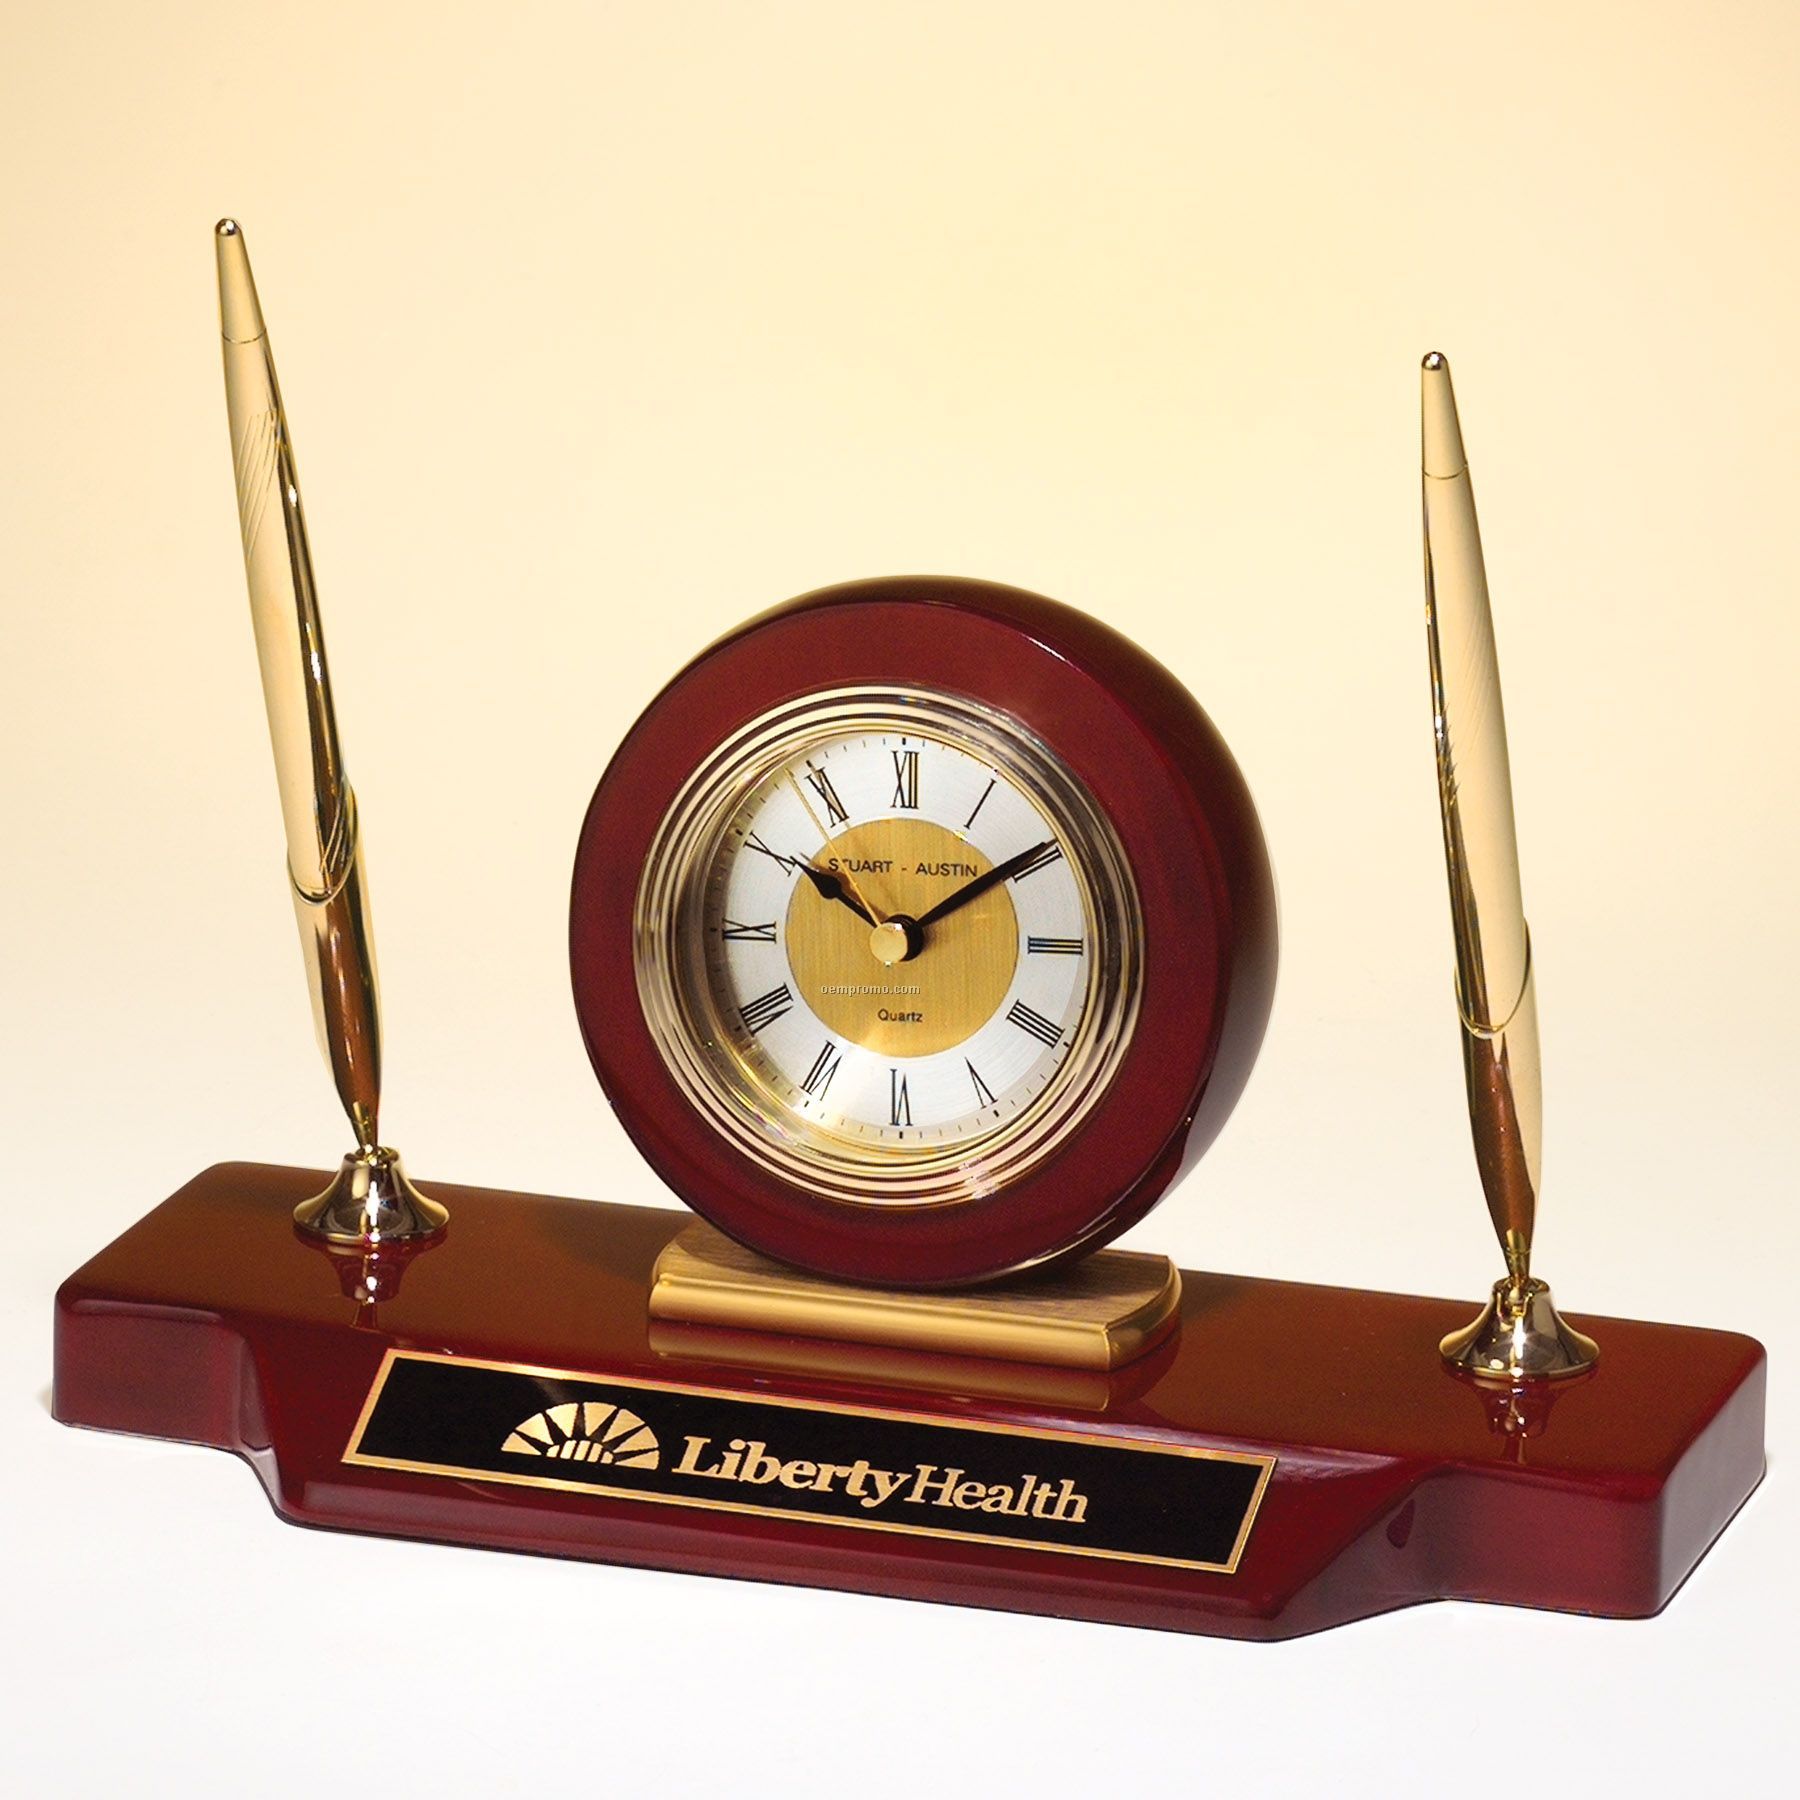 Rosewood Piano Finish Clock With Two Pens